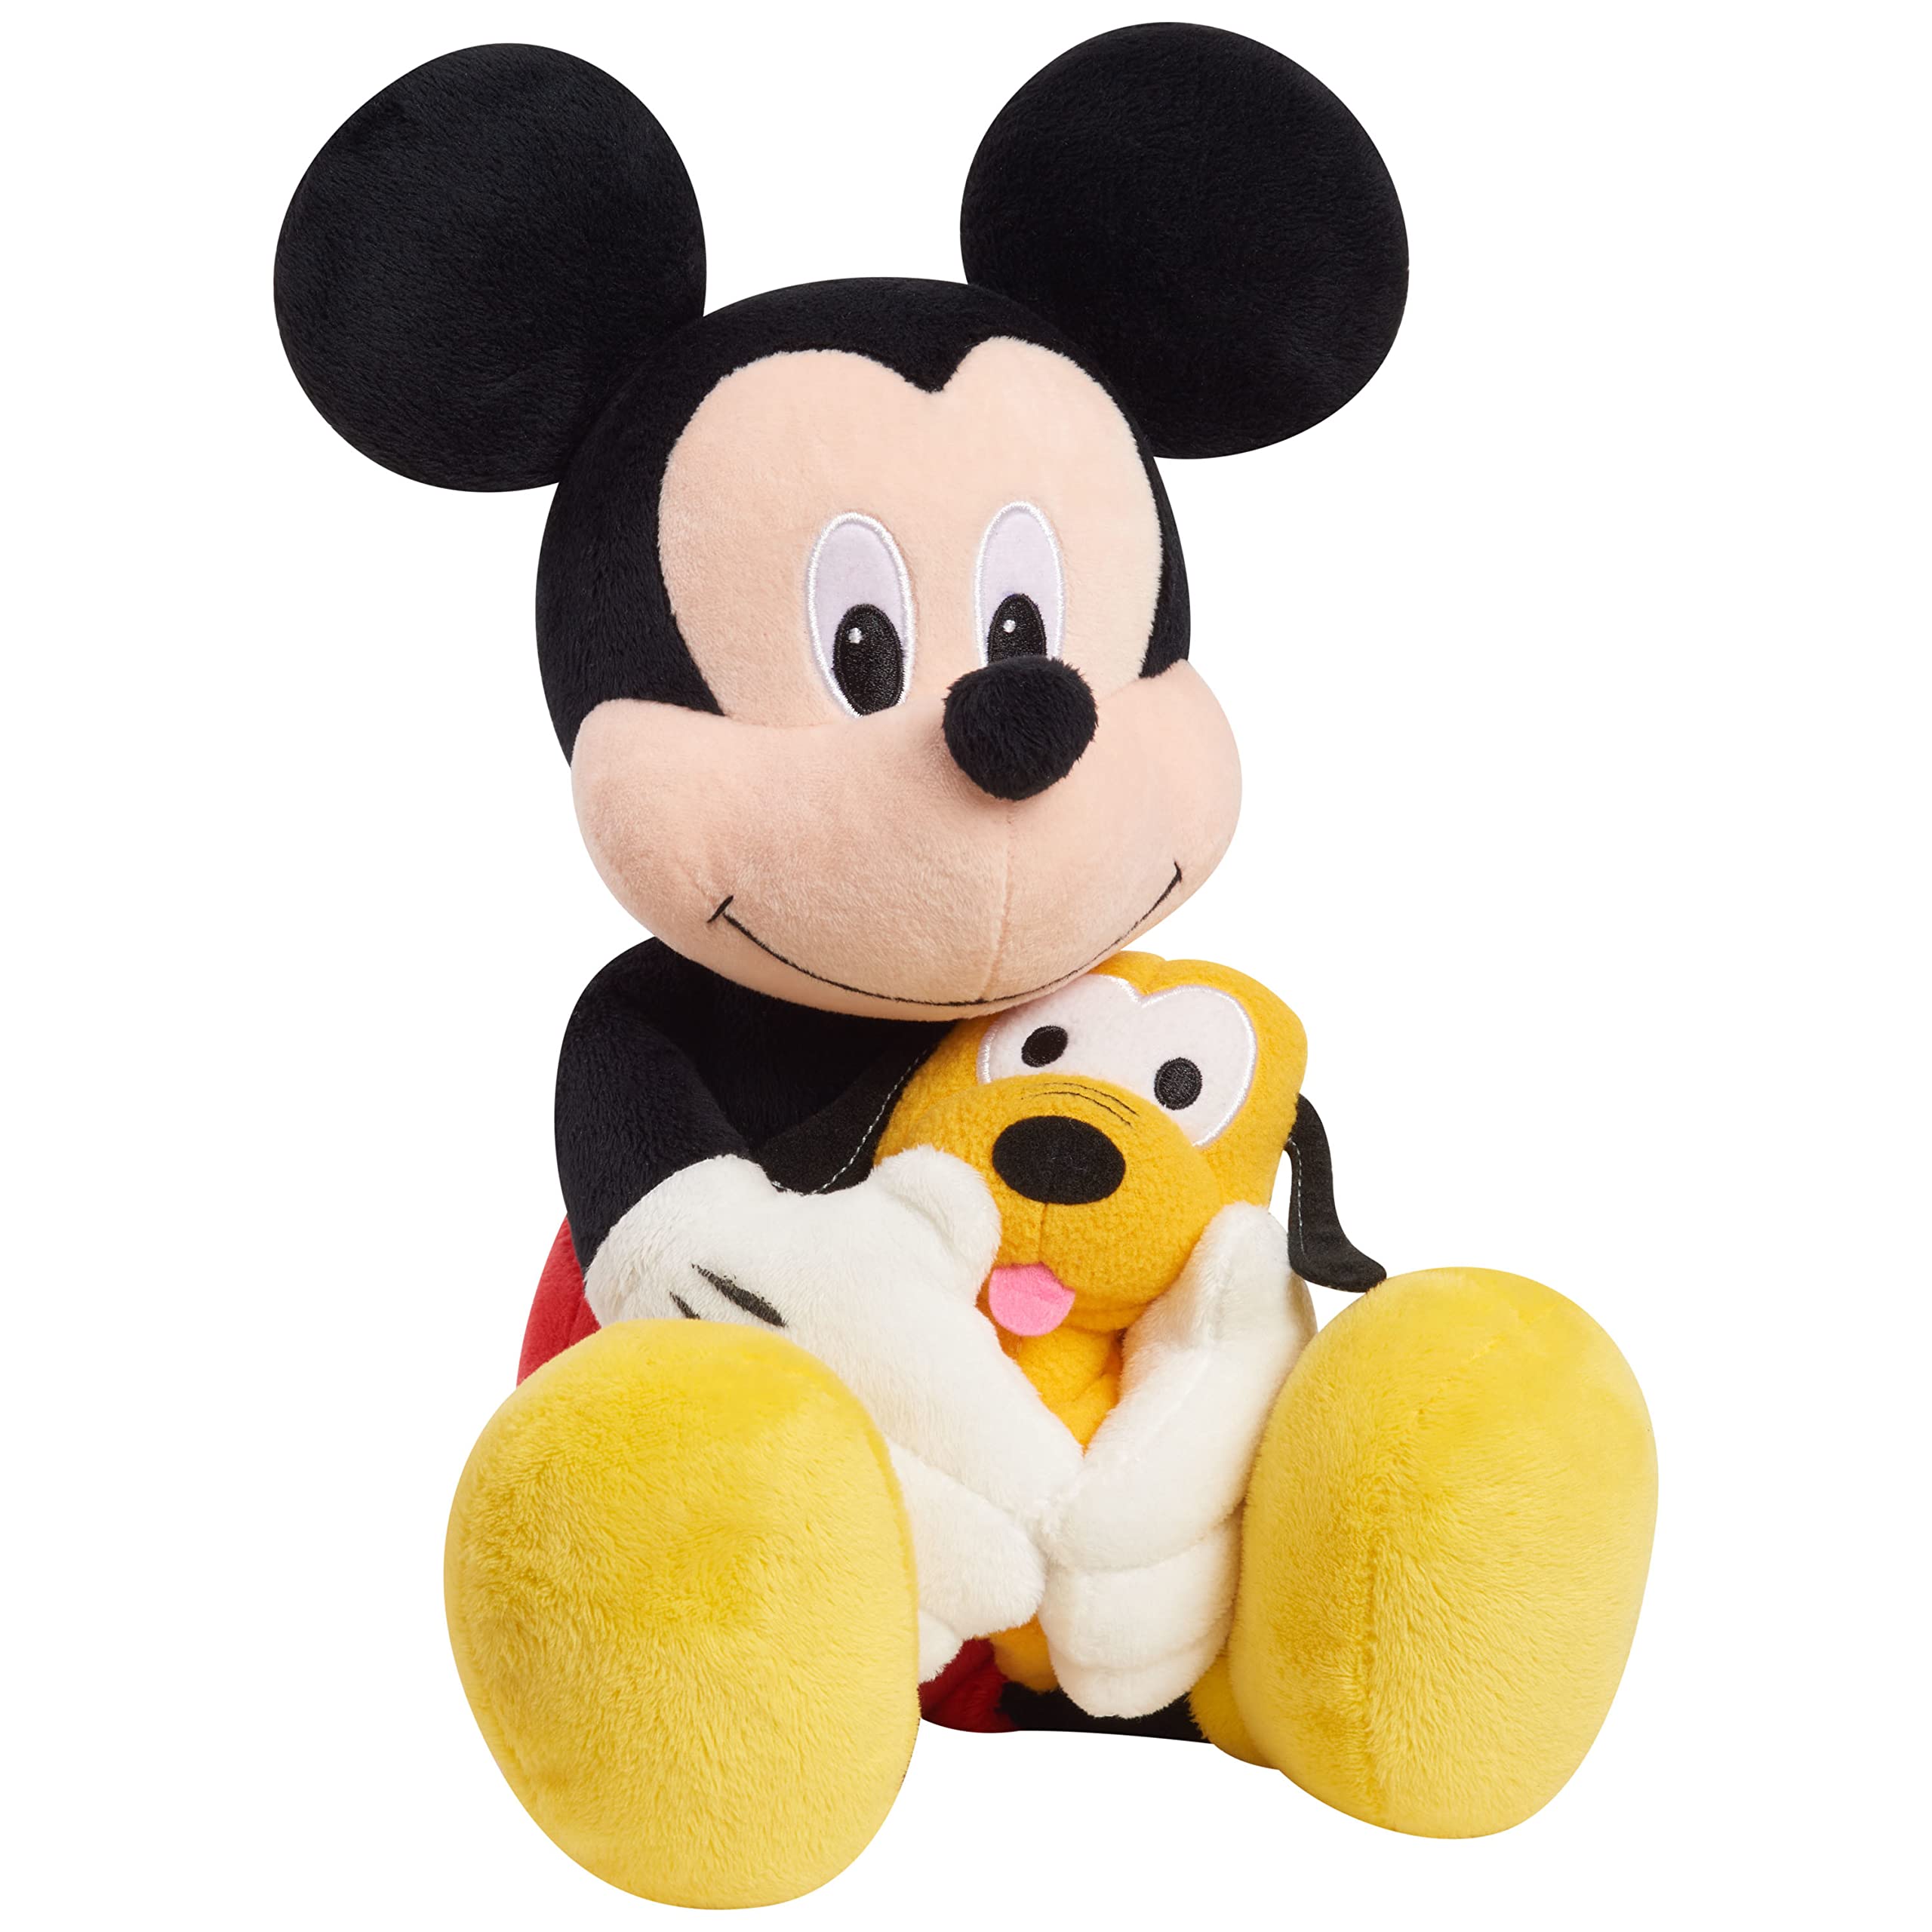 DISNEY CLASSIC Lil Friends Mickey Mouse and Pluto Plush Stuffed Animal, Officially Licensed Kids Toys for Ages 0+ by Just Play